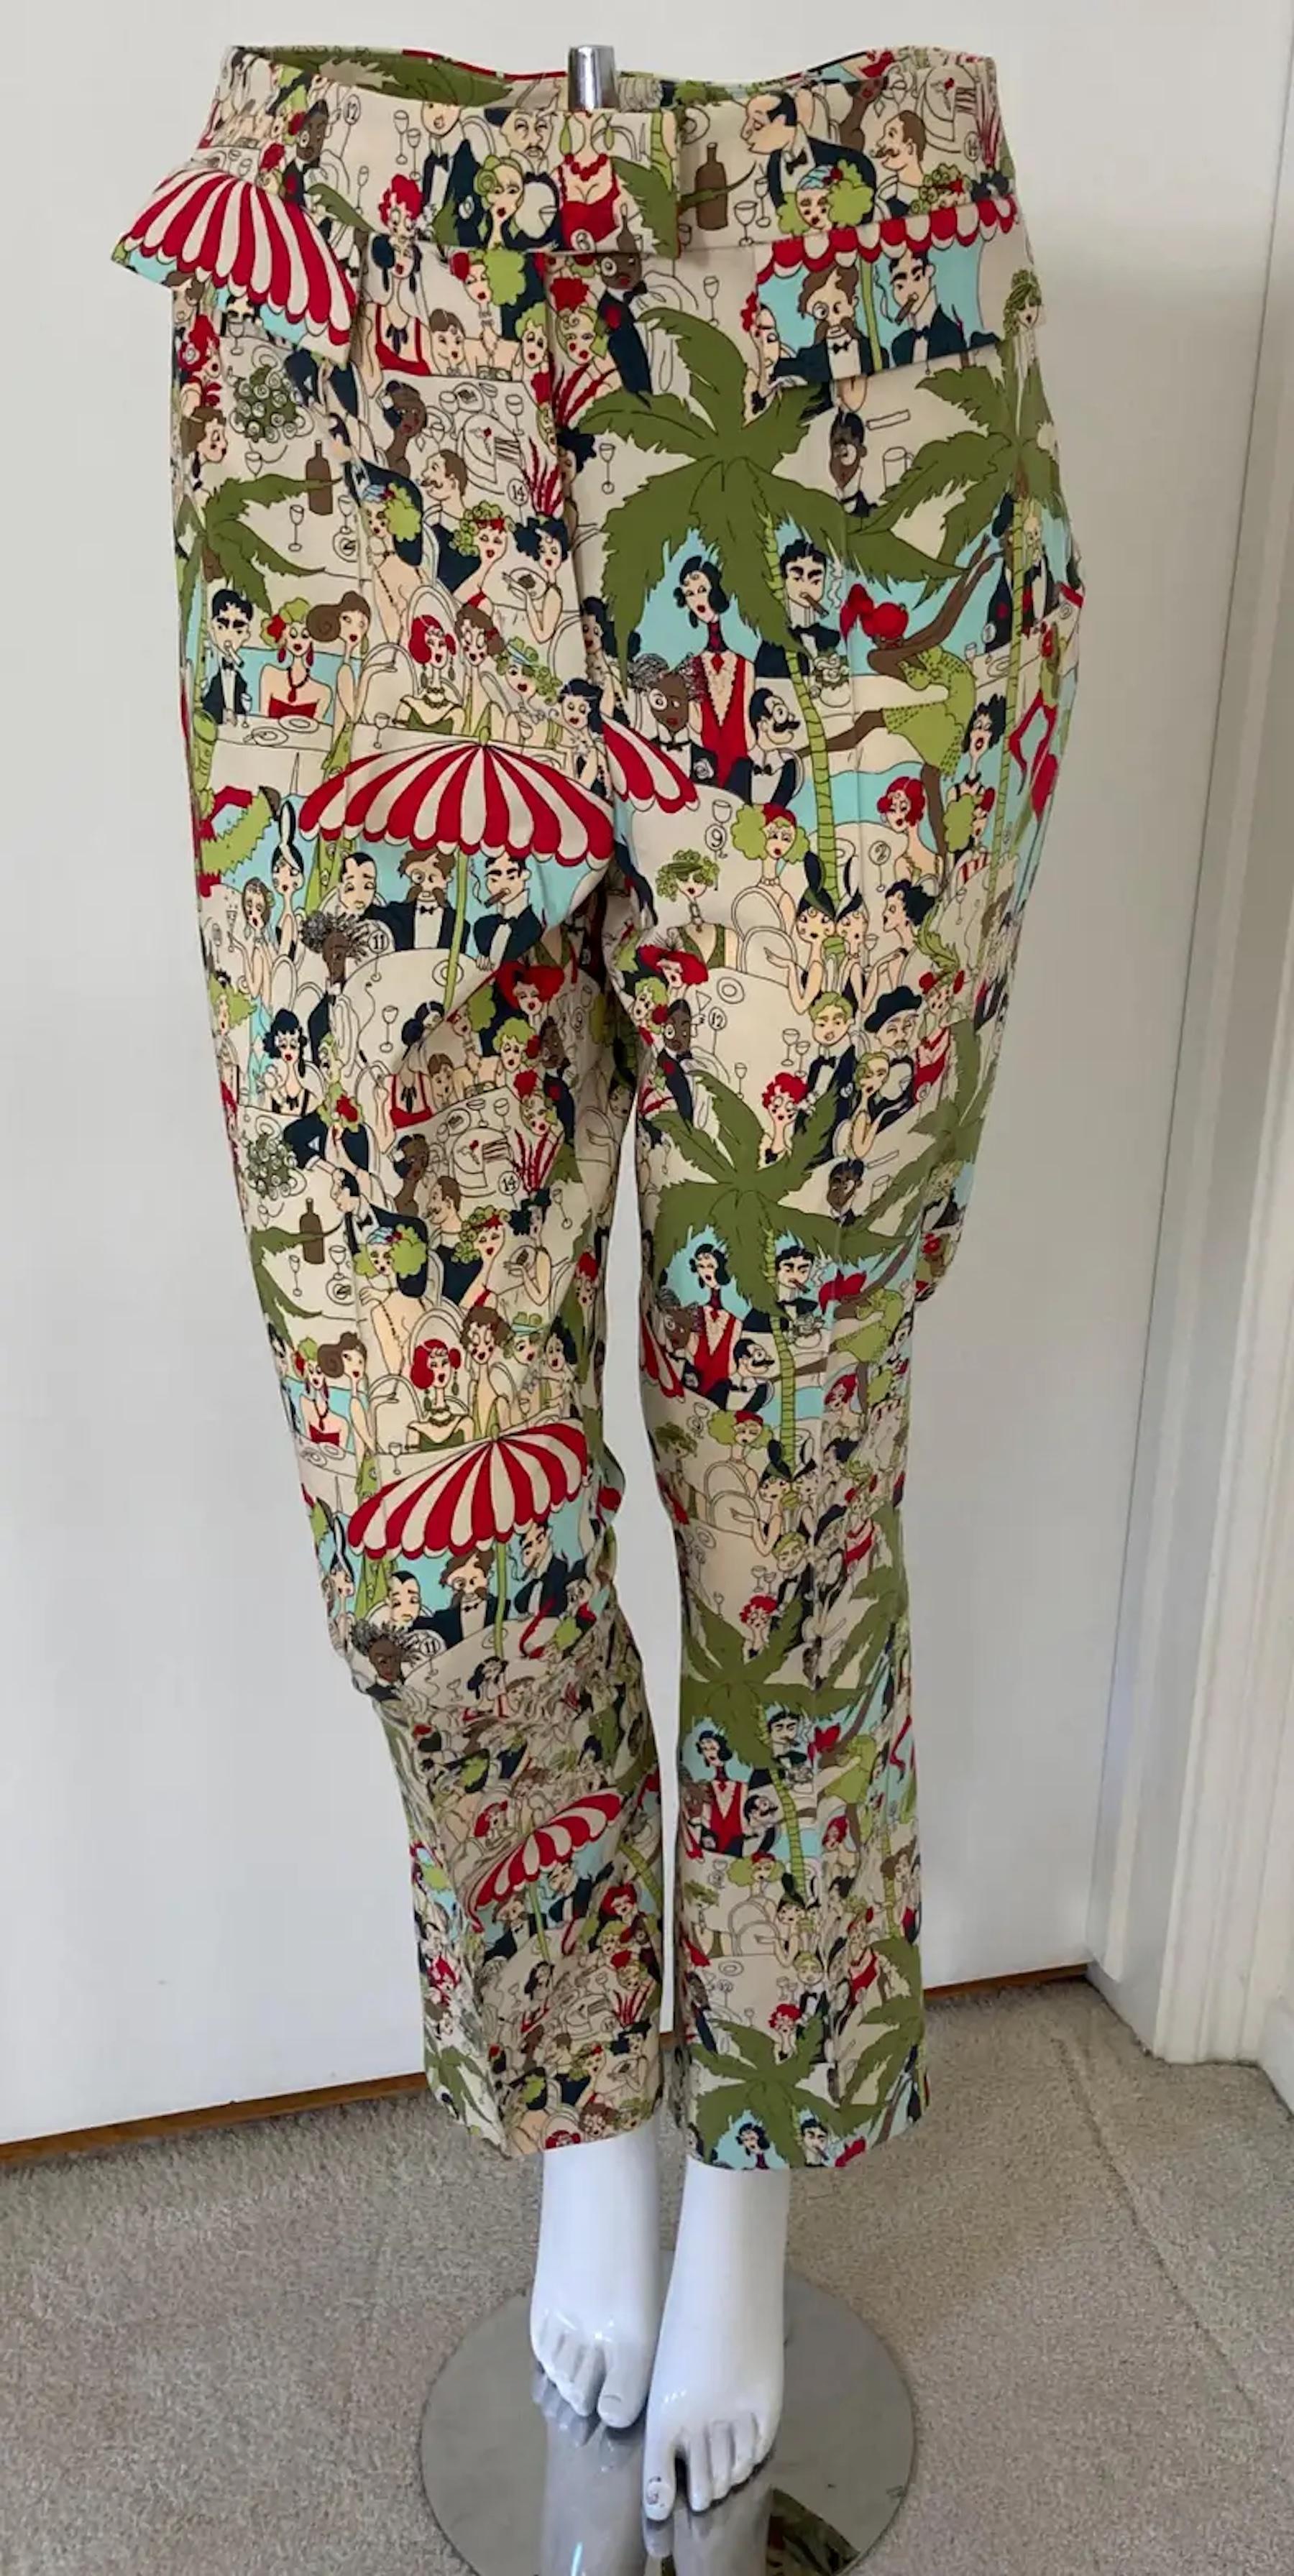 John Galliano Cafe Society Print Vintage Pants, Rare Trousers, 1999's For Sale 9